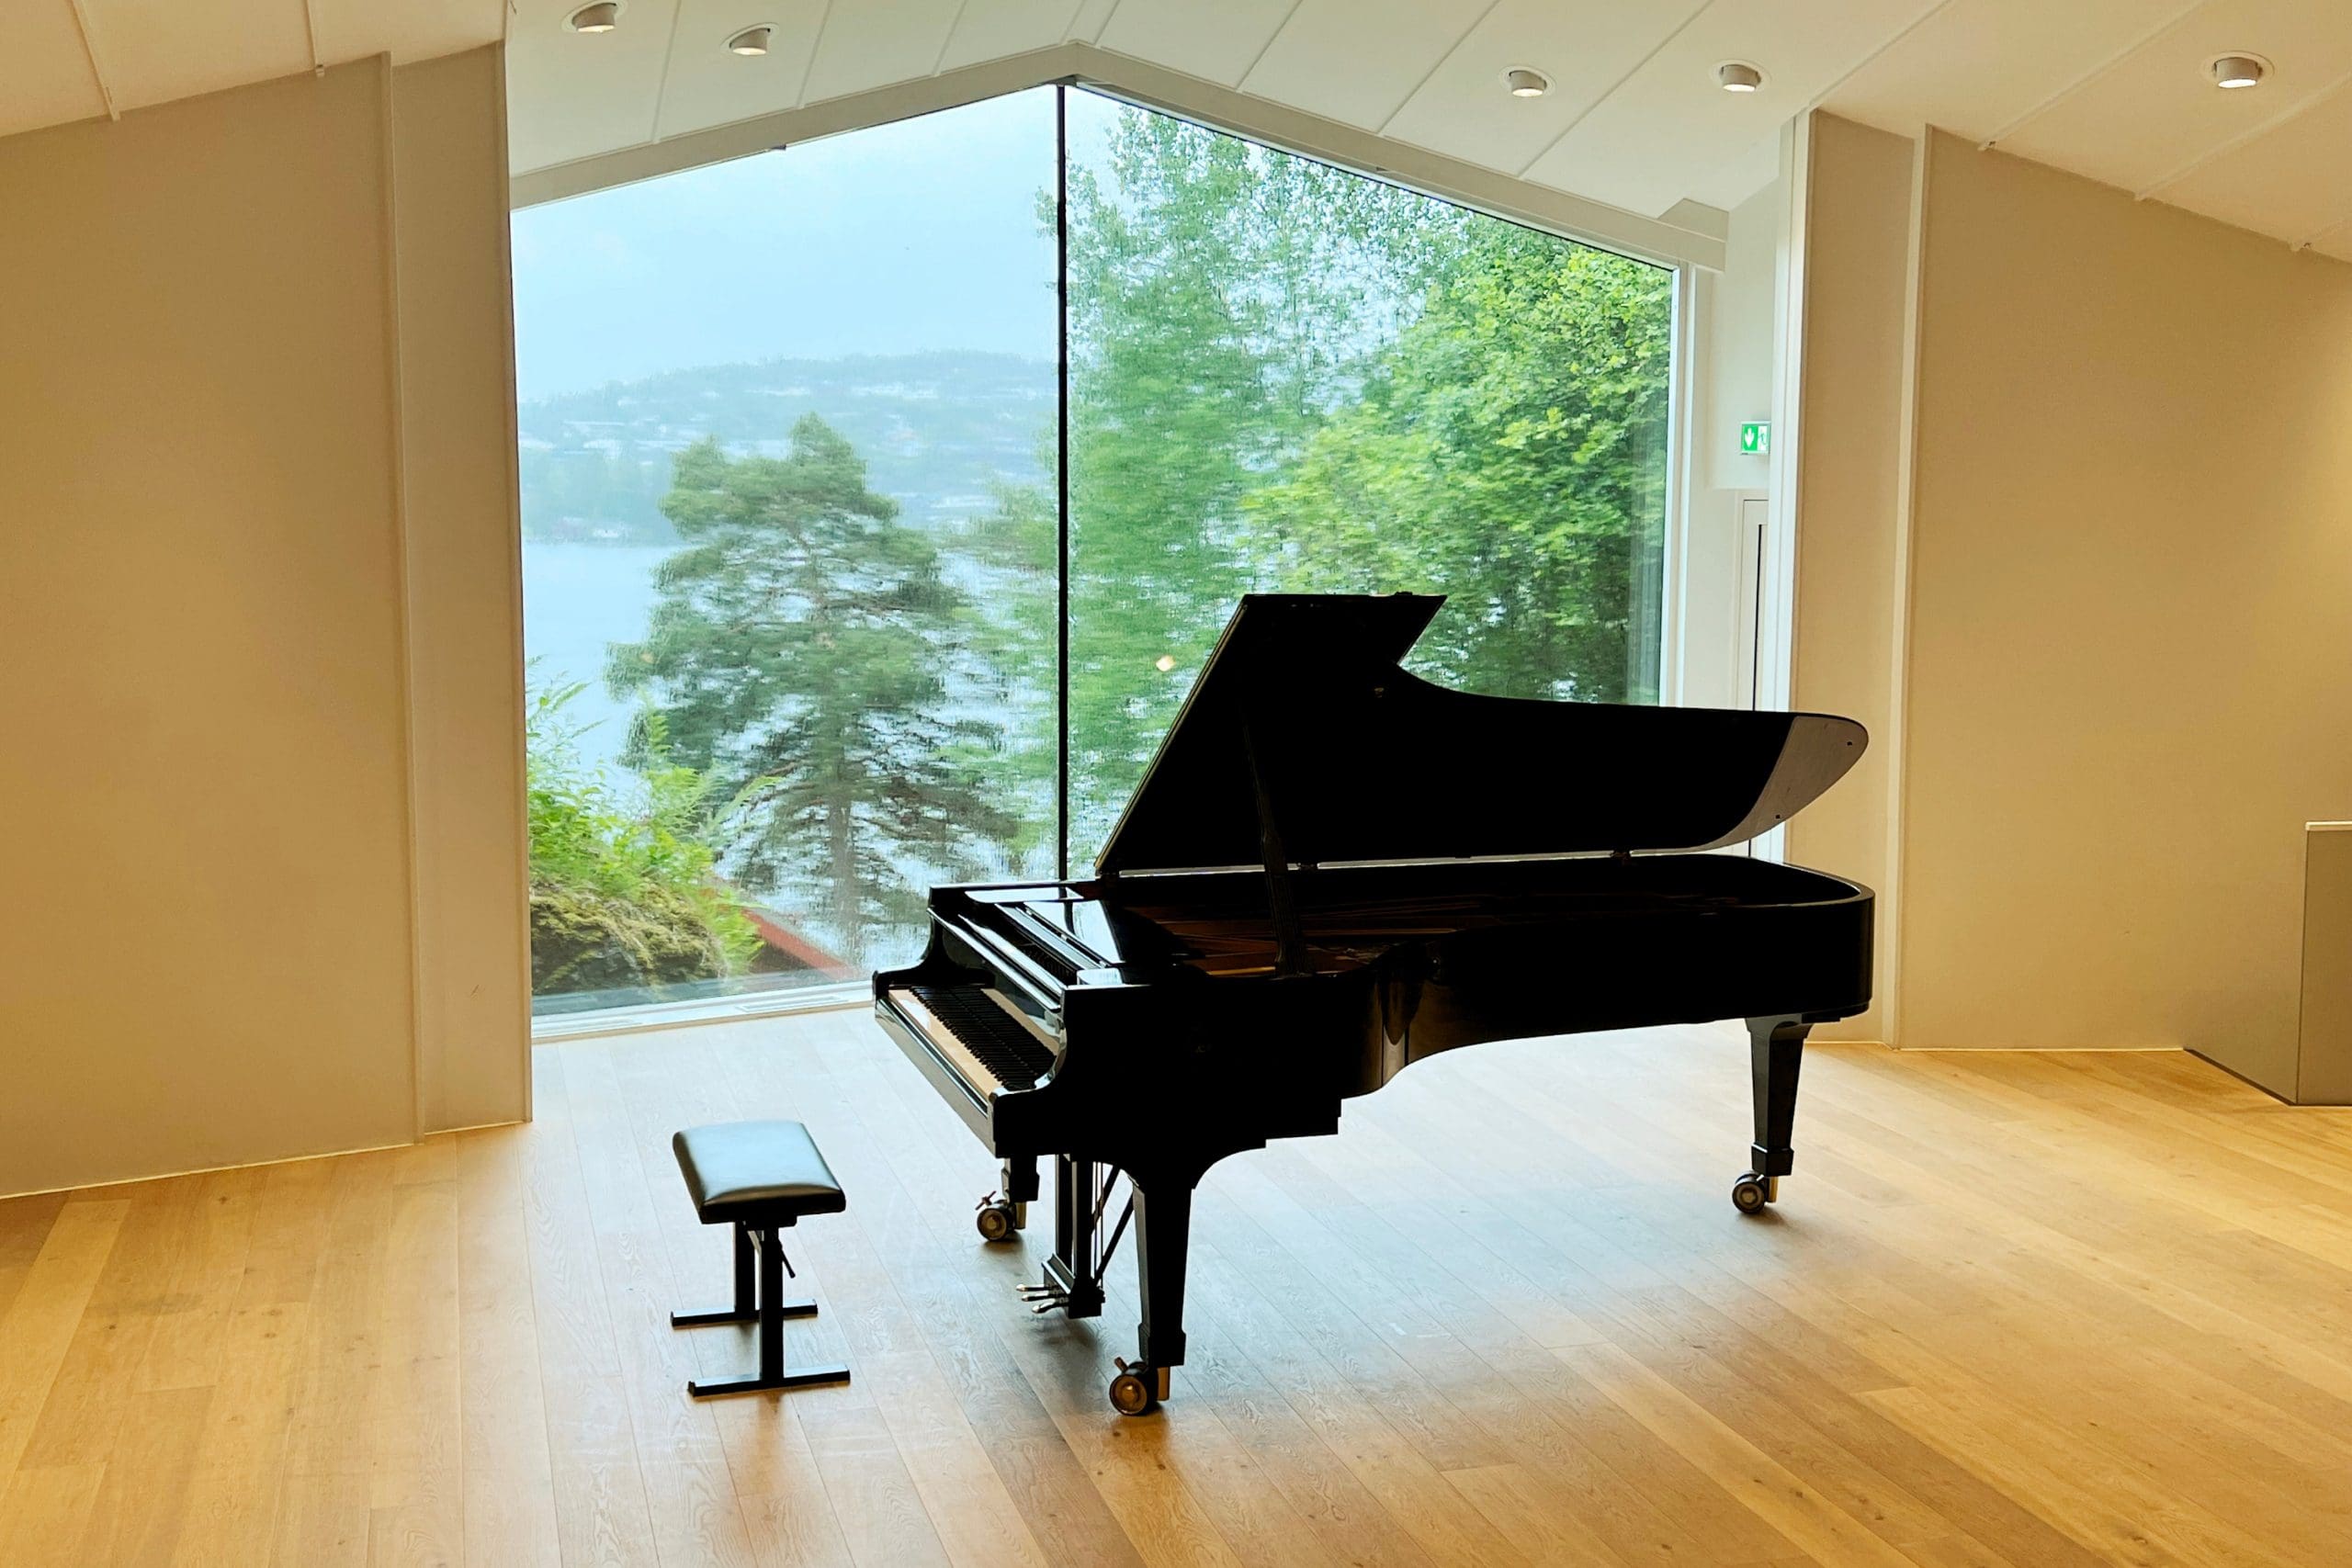 Photo of the piano in Grieg's concert hall